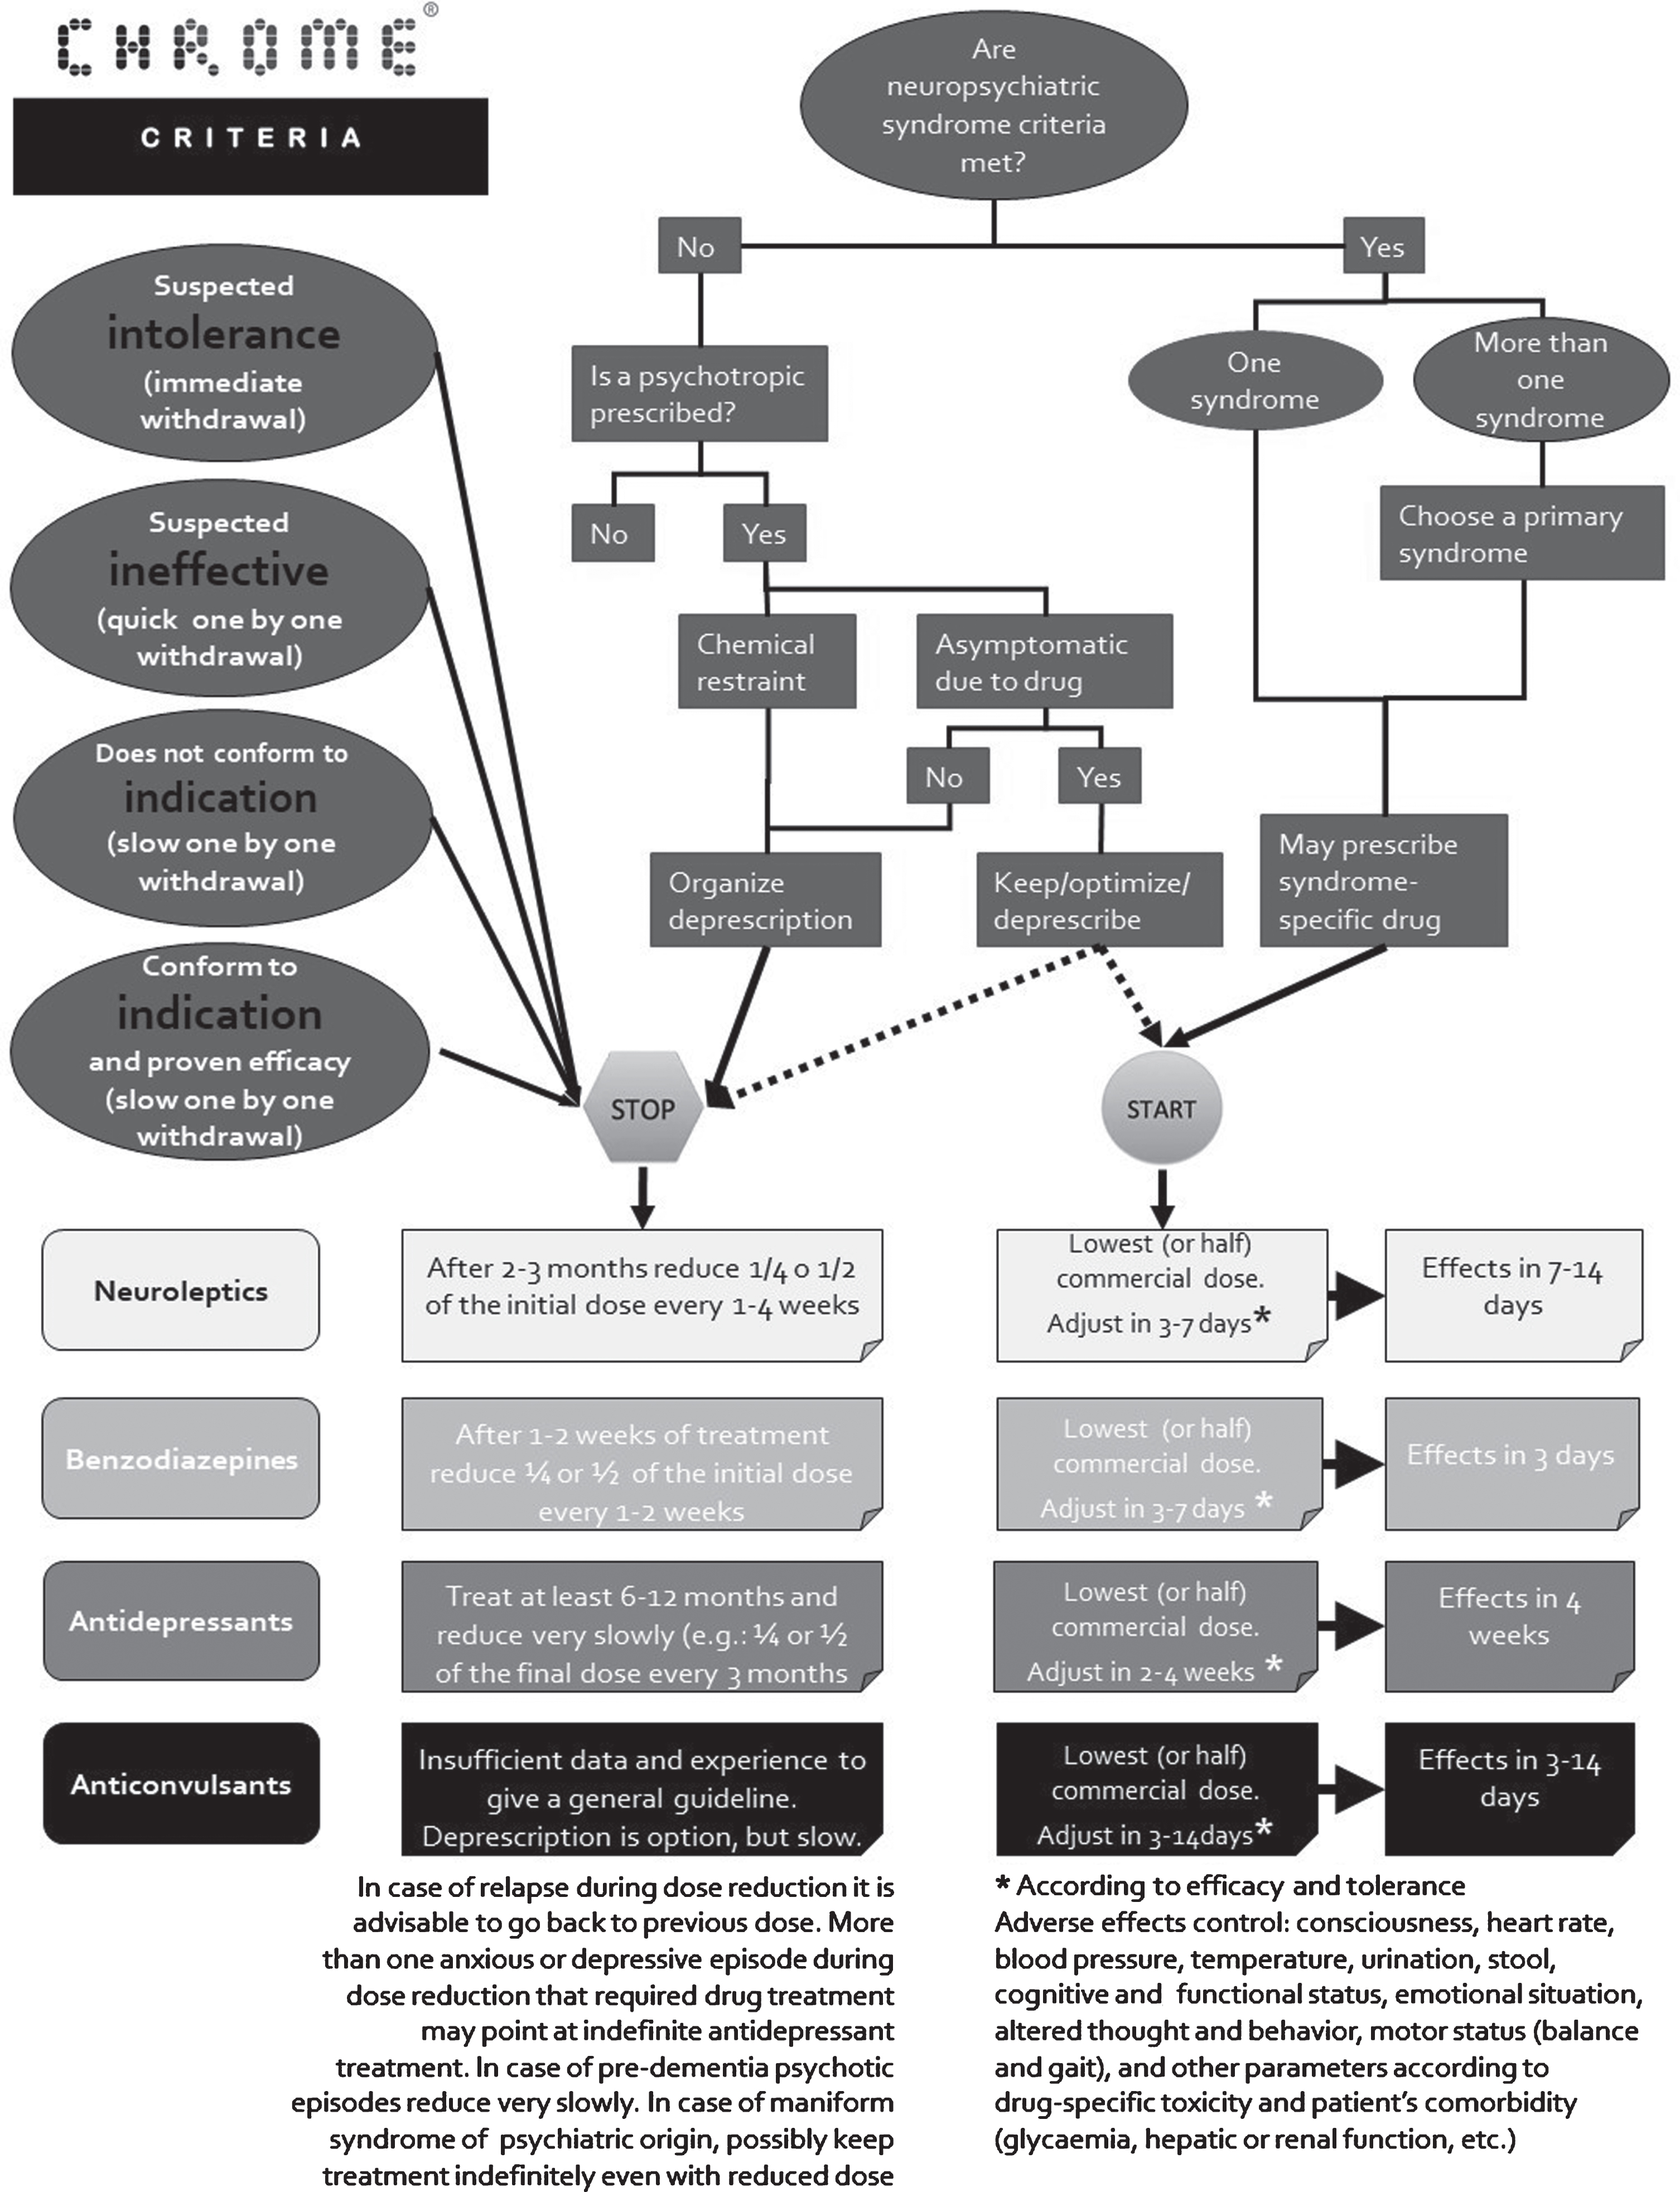 Algorithm for psychotropic medication withdrawal, initiation, and effect control, according to CHROME criteria.